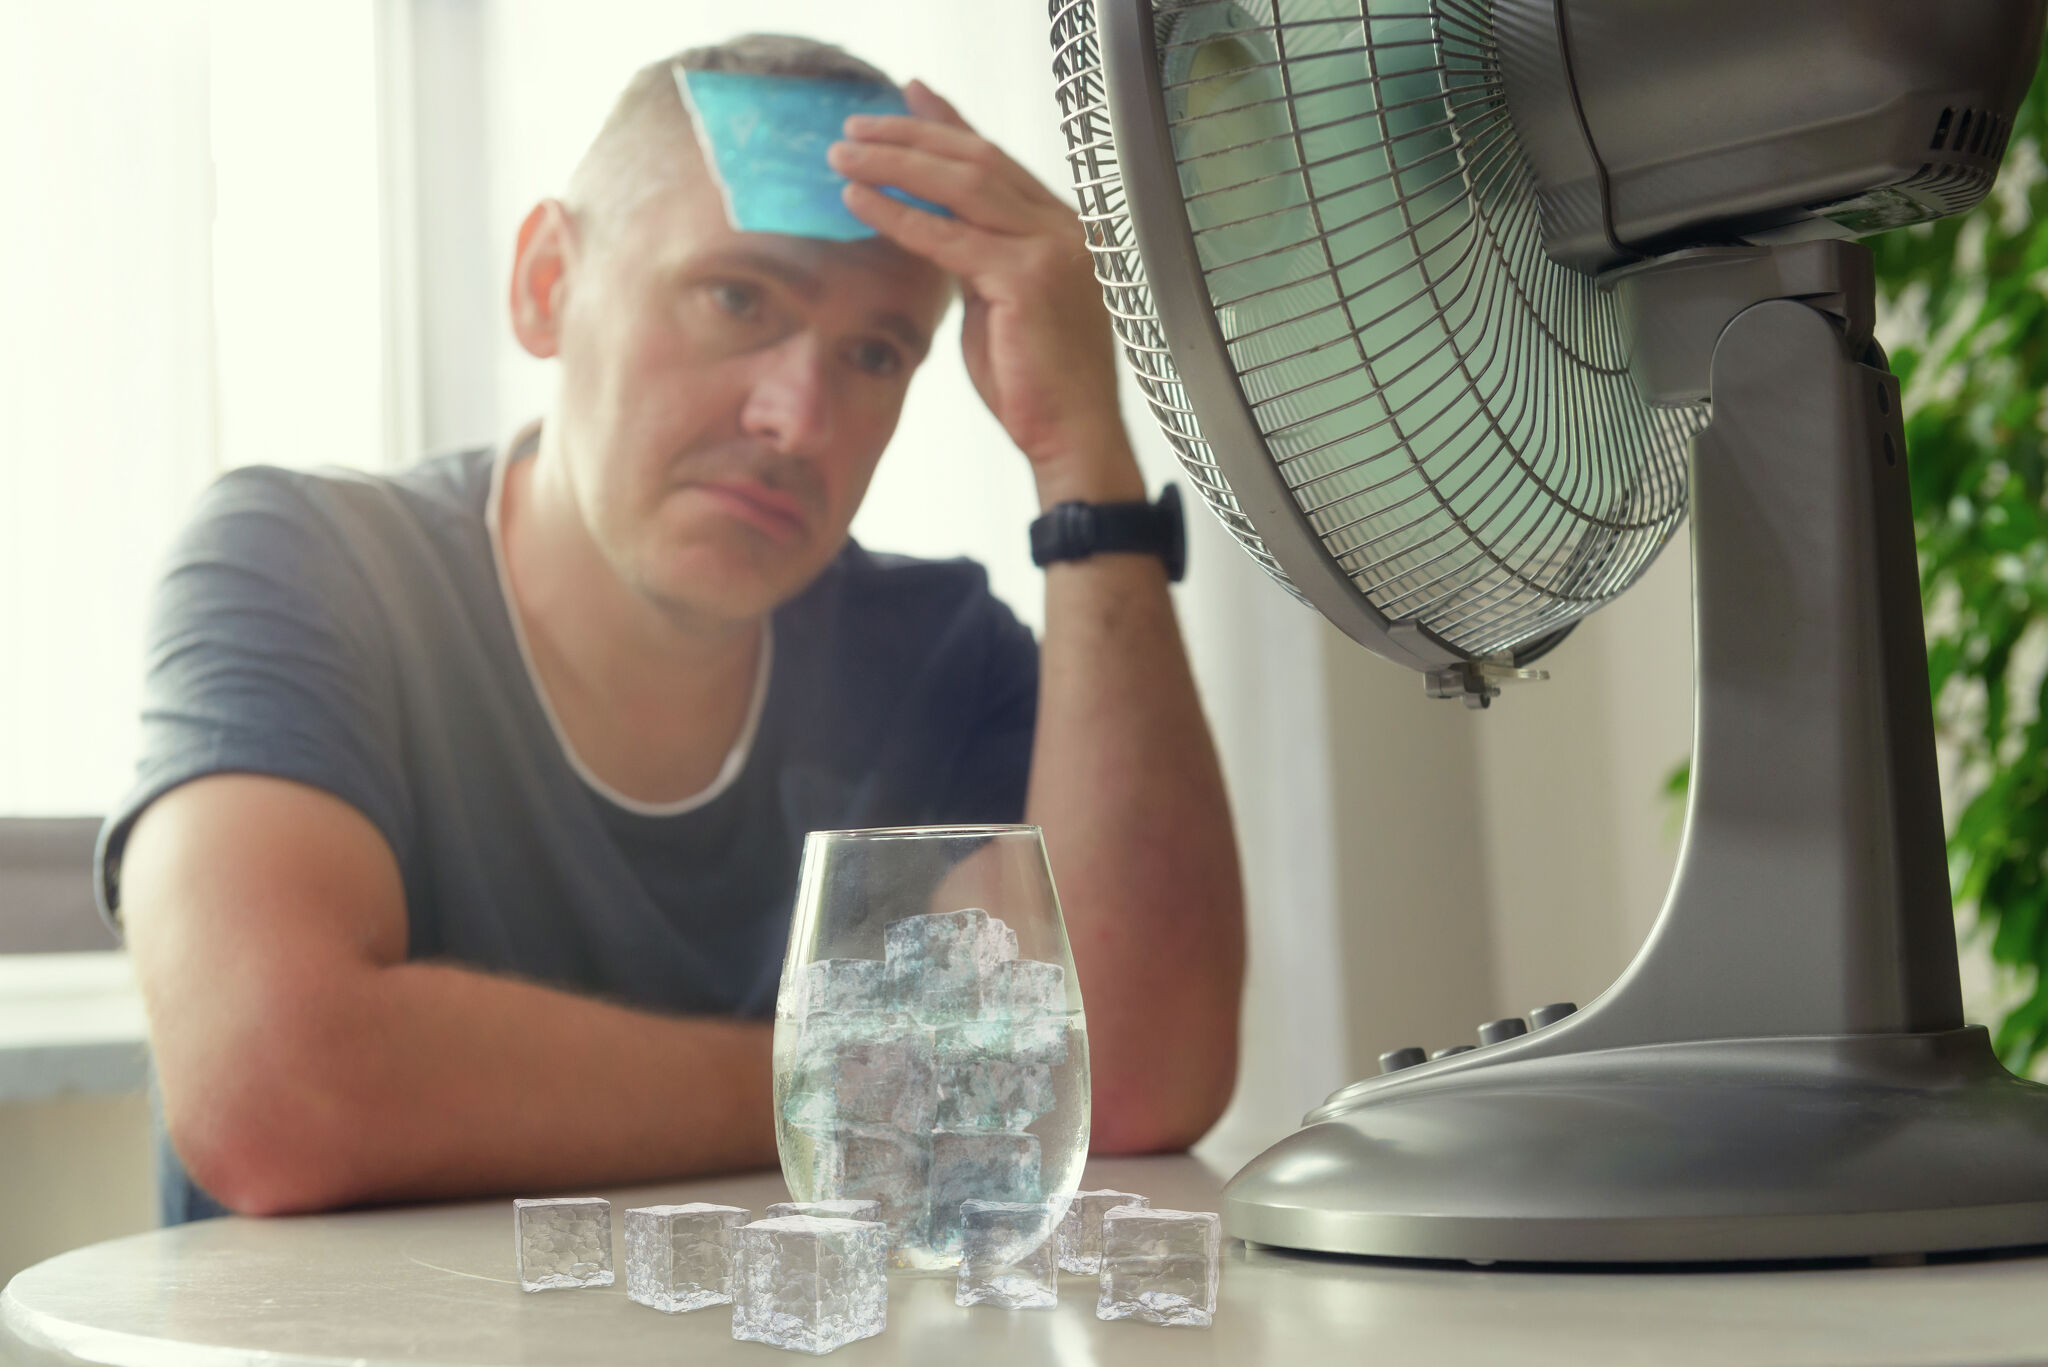 5 ways to chill without air conditioning